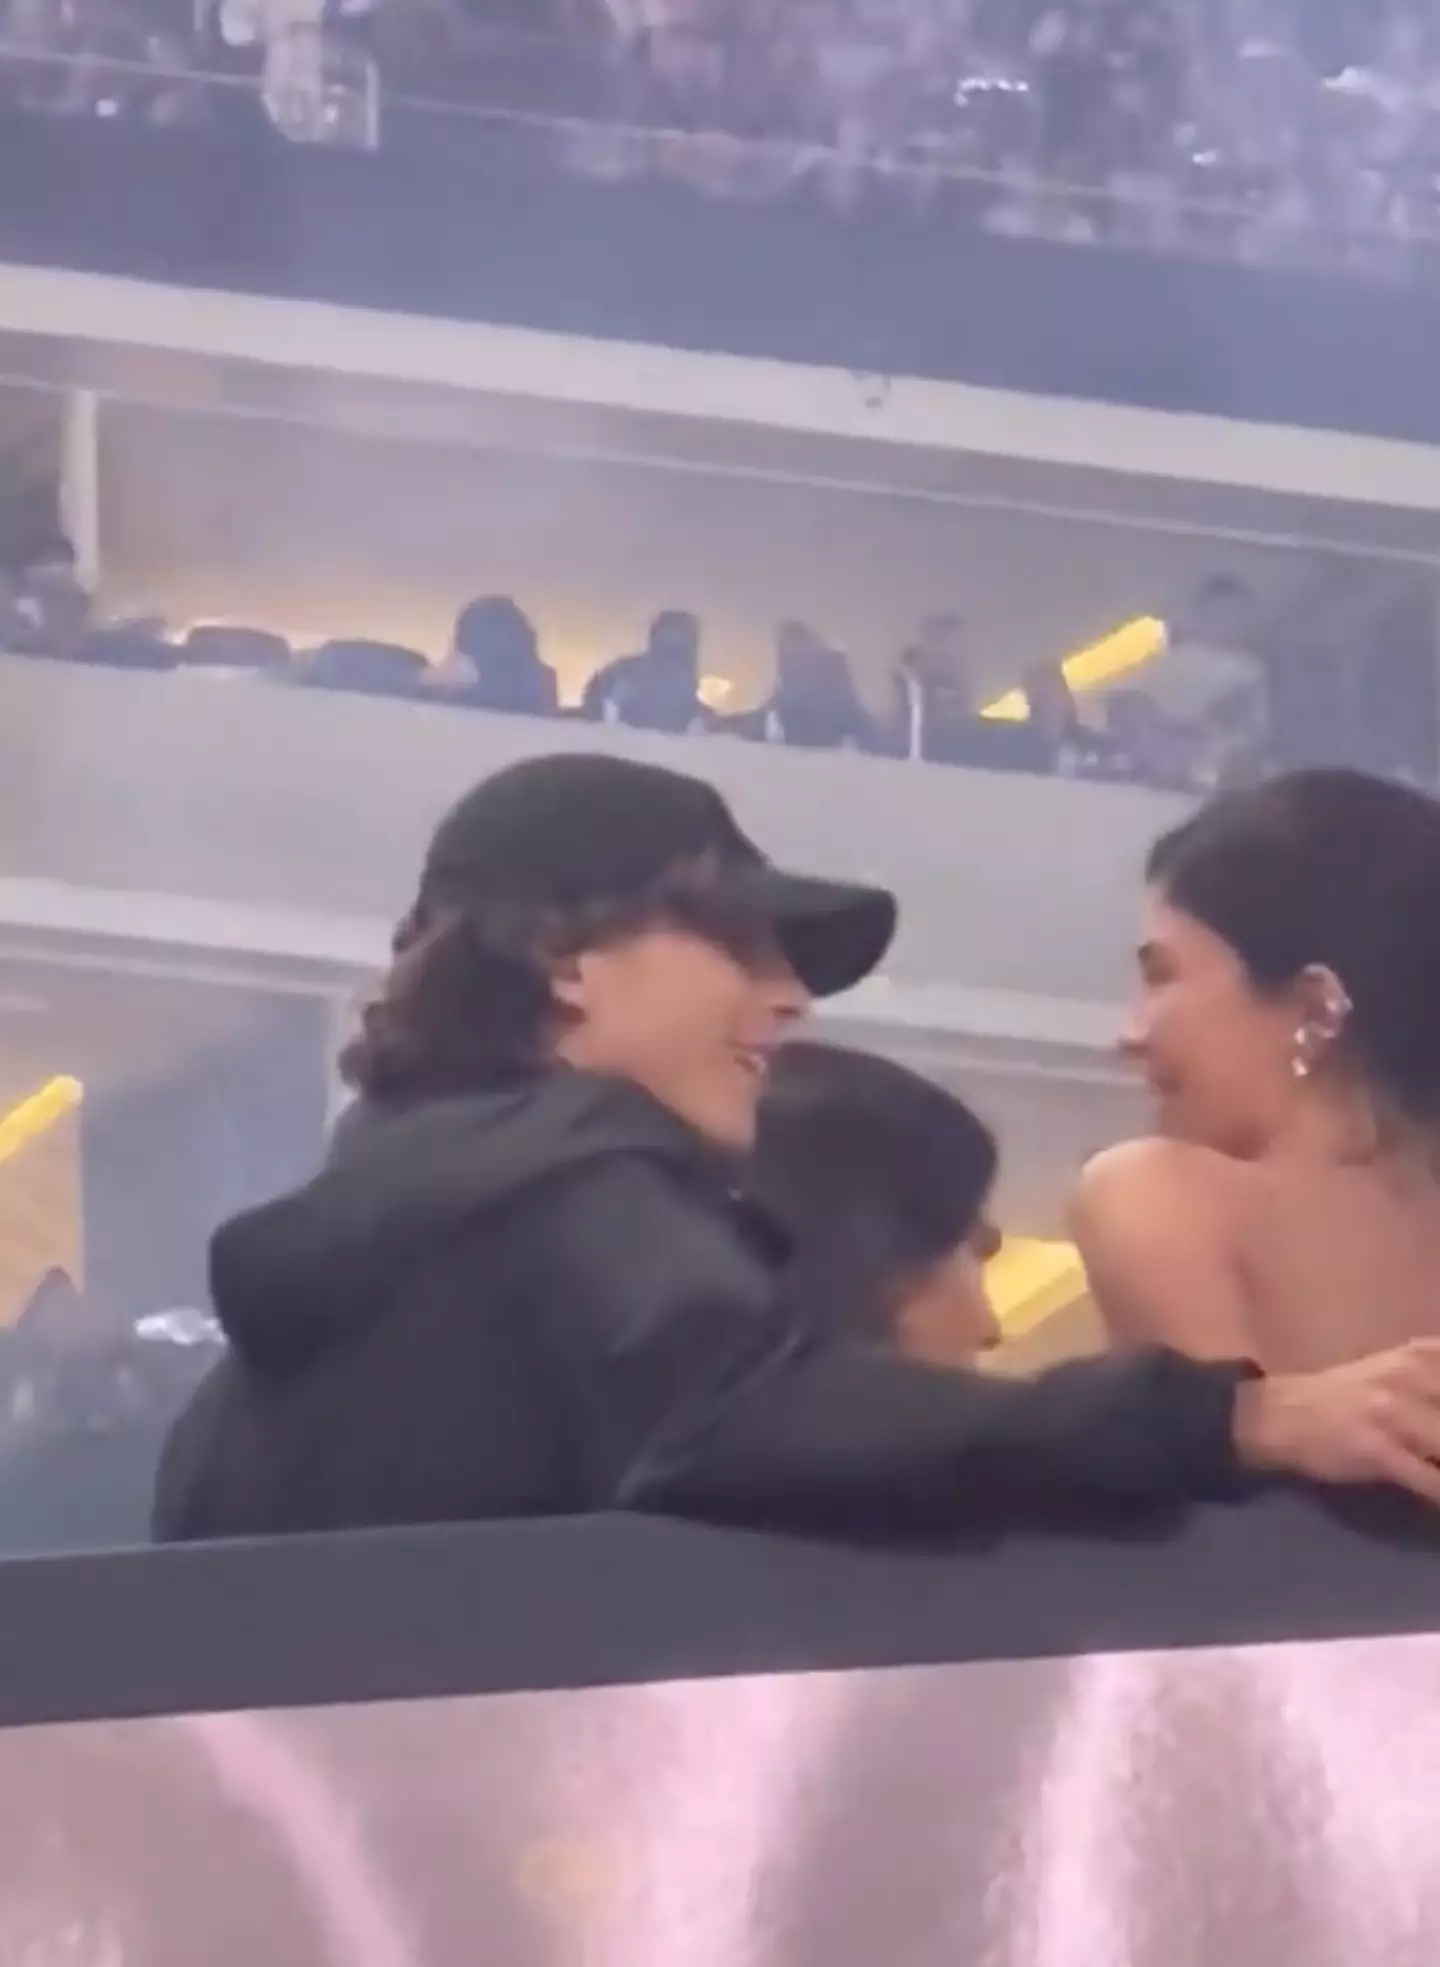 Timothee and Kylie have yet to confirm their relationship.